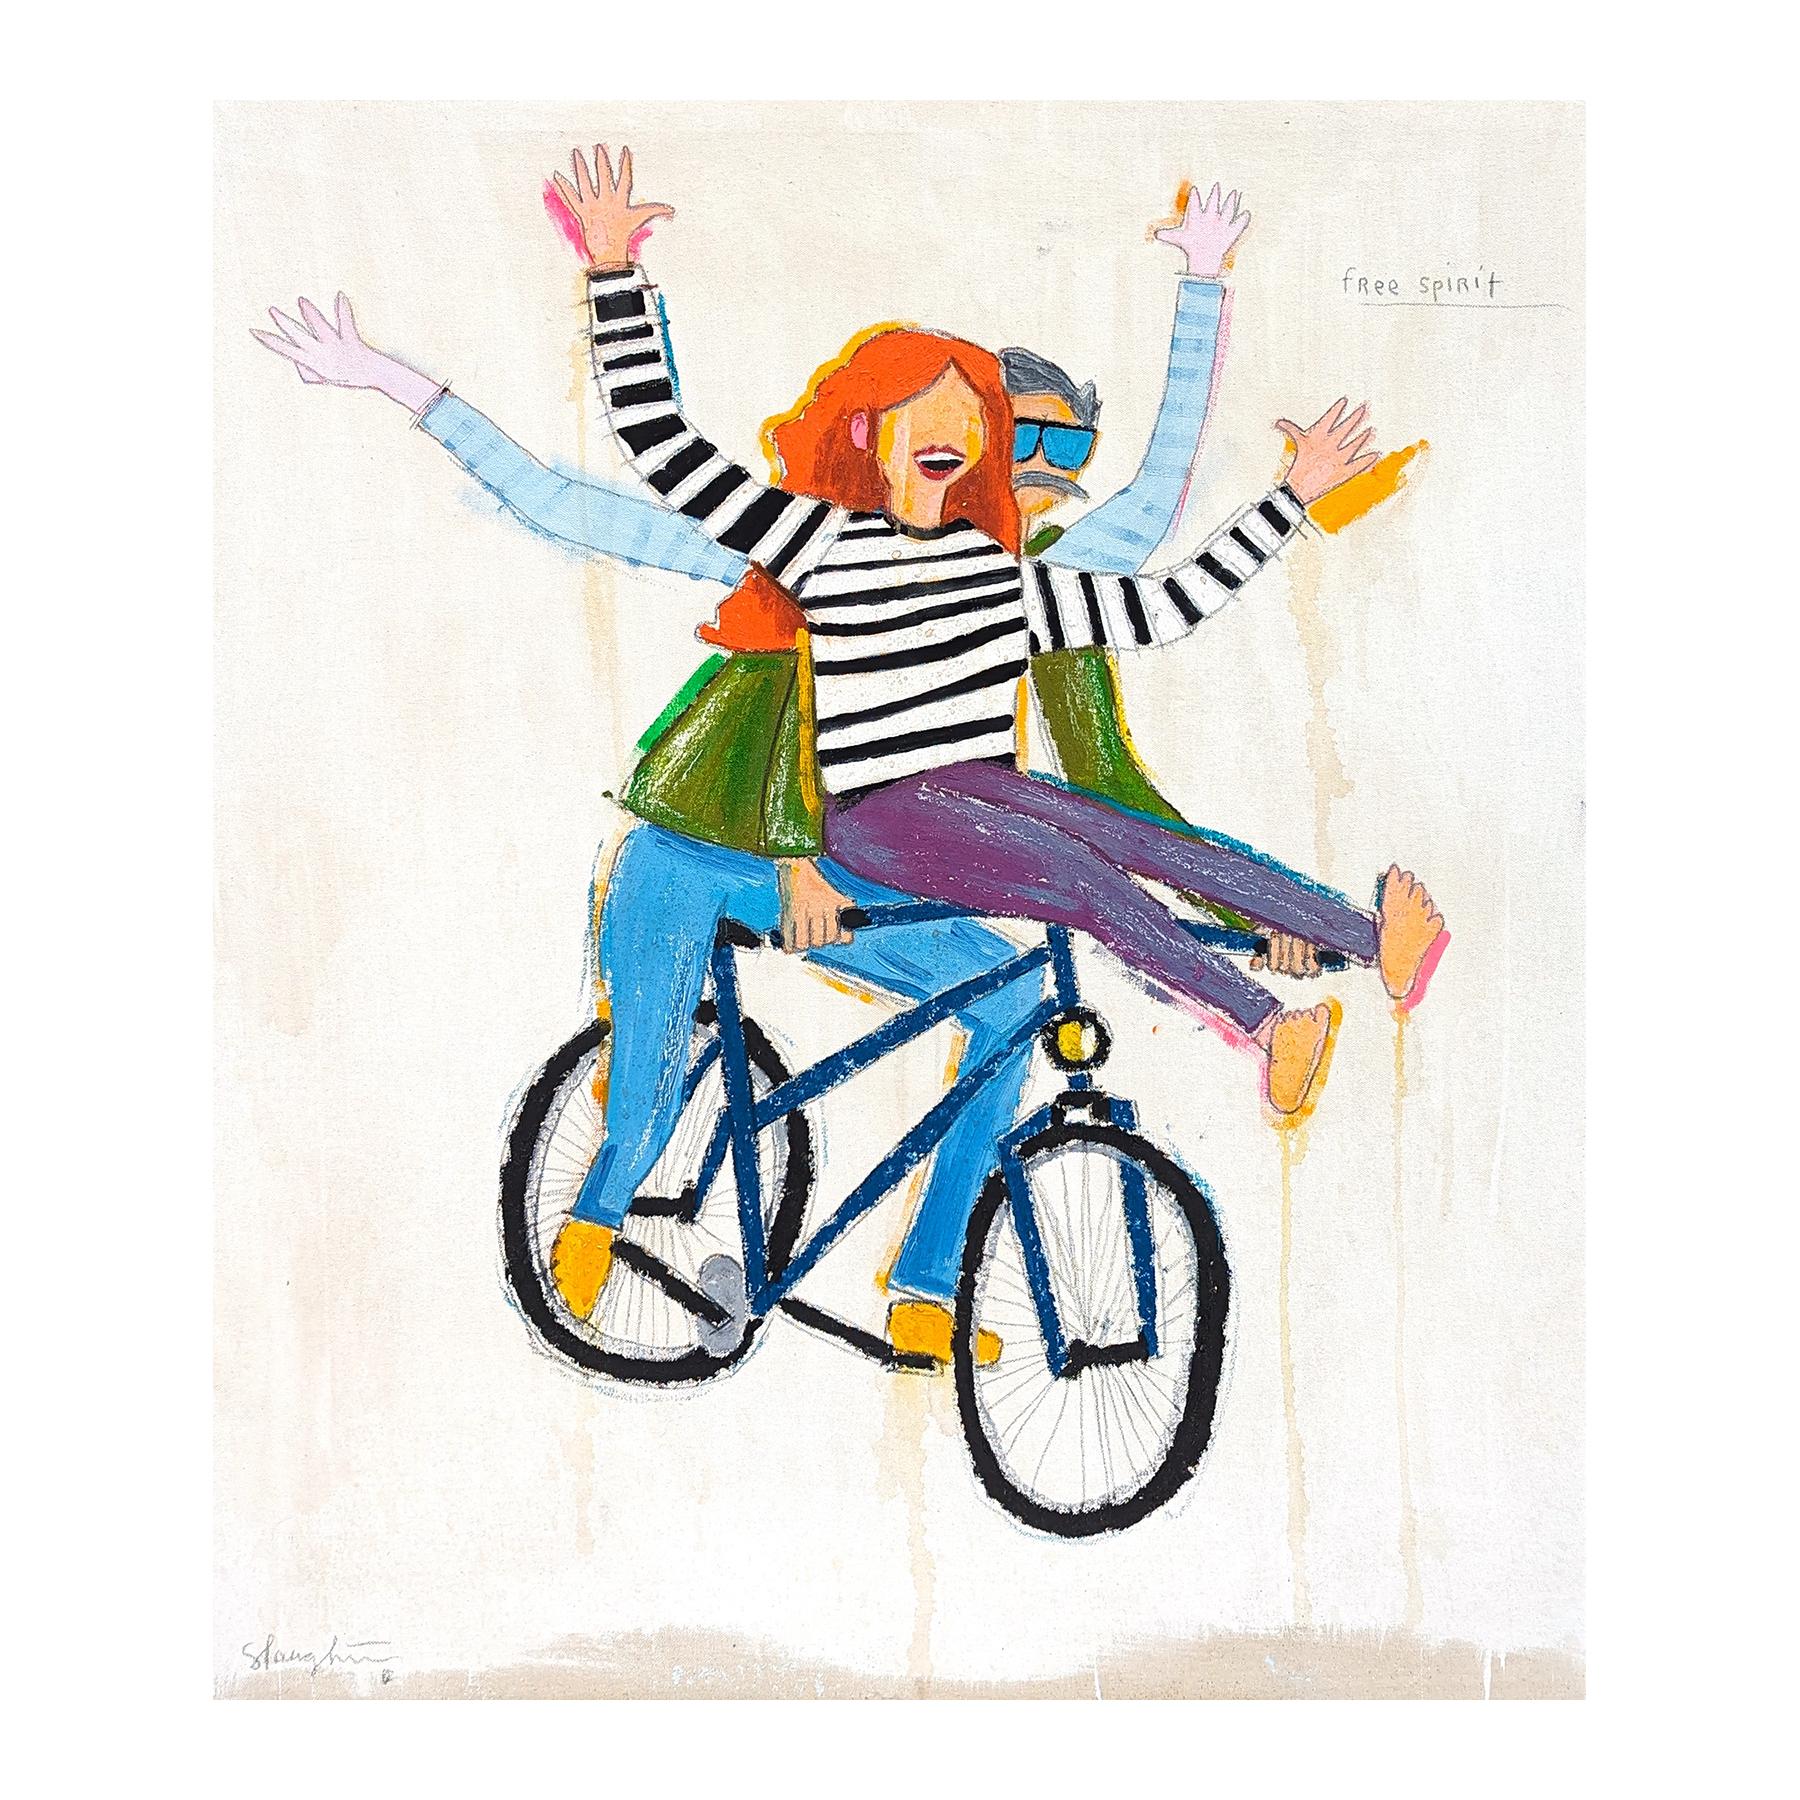 Figurative contemporary painting by Houston, TX artist Tra' Slaughter. The painting features a couple riding on a bicycle set against a light tan background. Signed in the front lower left corner as well as signed, titled, and dated on the reverse.